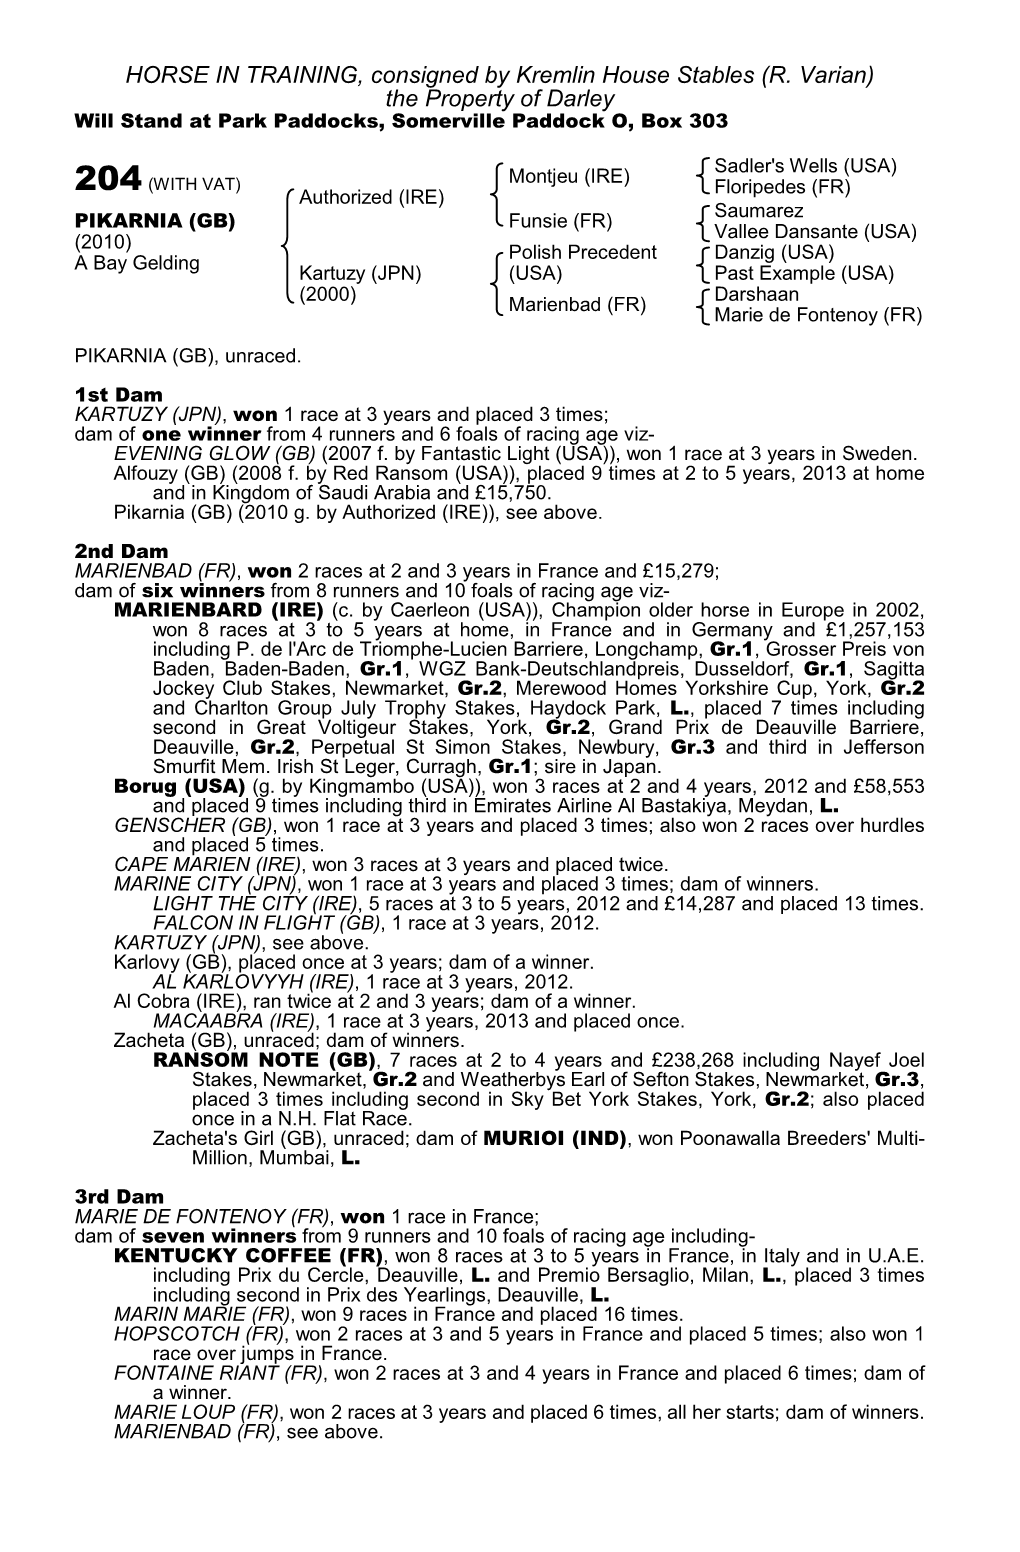 HORSE in TRAINING, Consigned by Kremlin House Stables (R. Varian) the Property of Darley Will Stand at Park Paddocks, Somerville Paddock O, Box 303